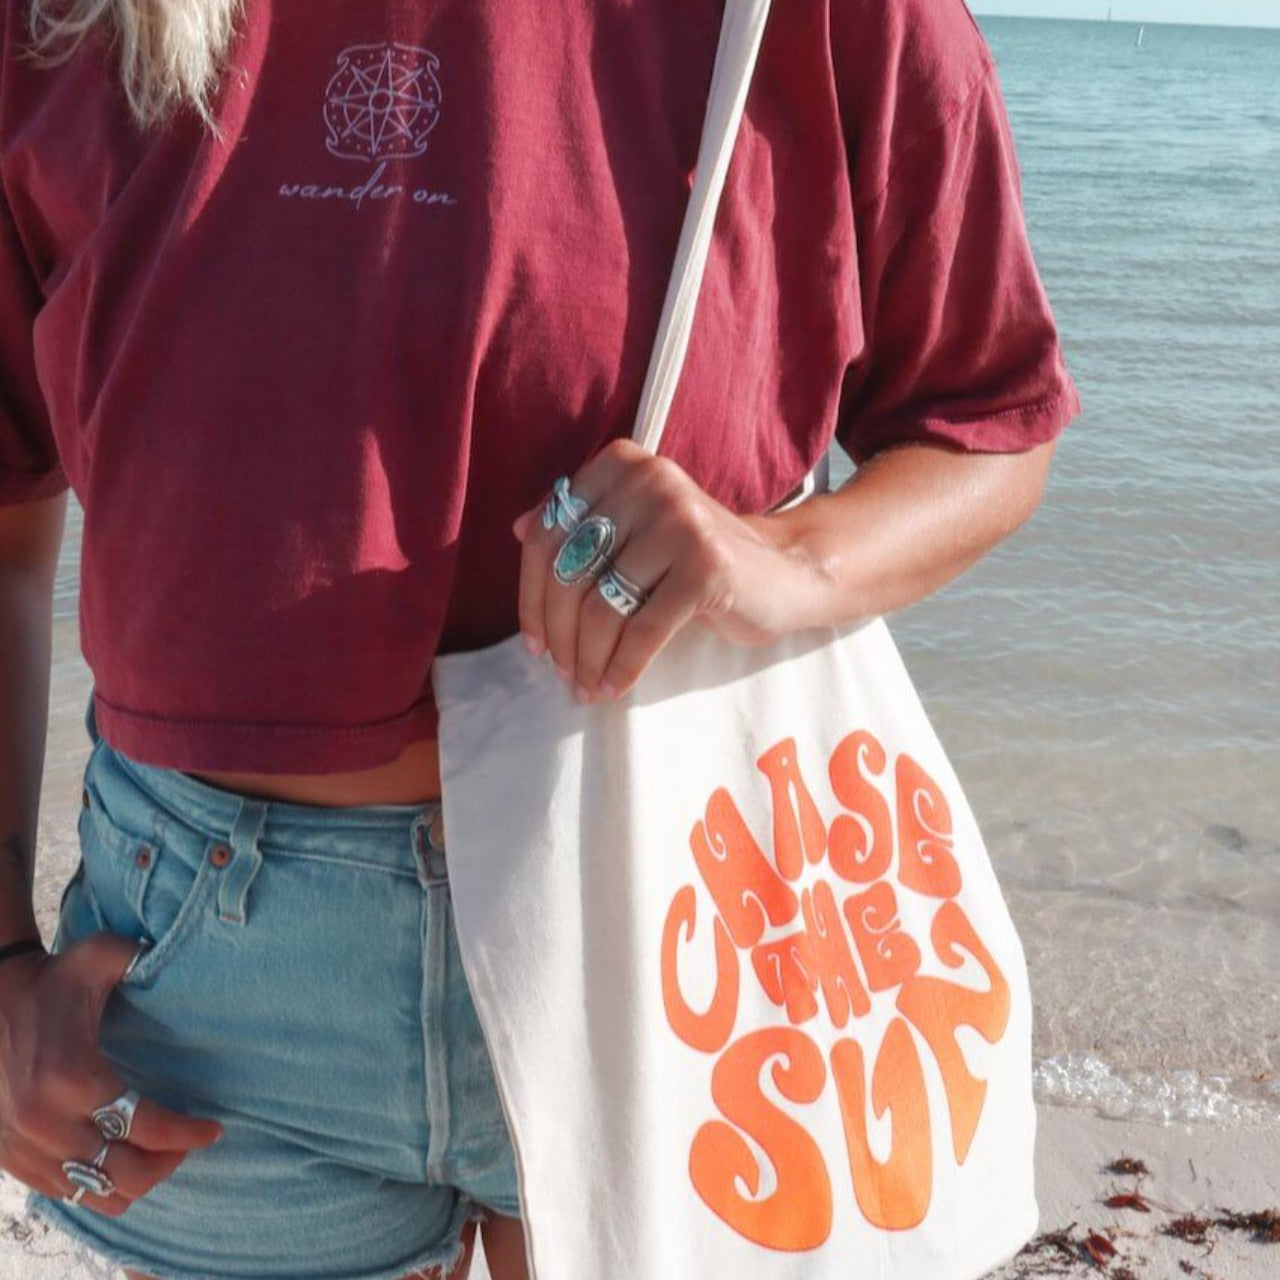 "Chase The Sun" canvas tote bag paired with "Wander On" crop